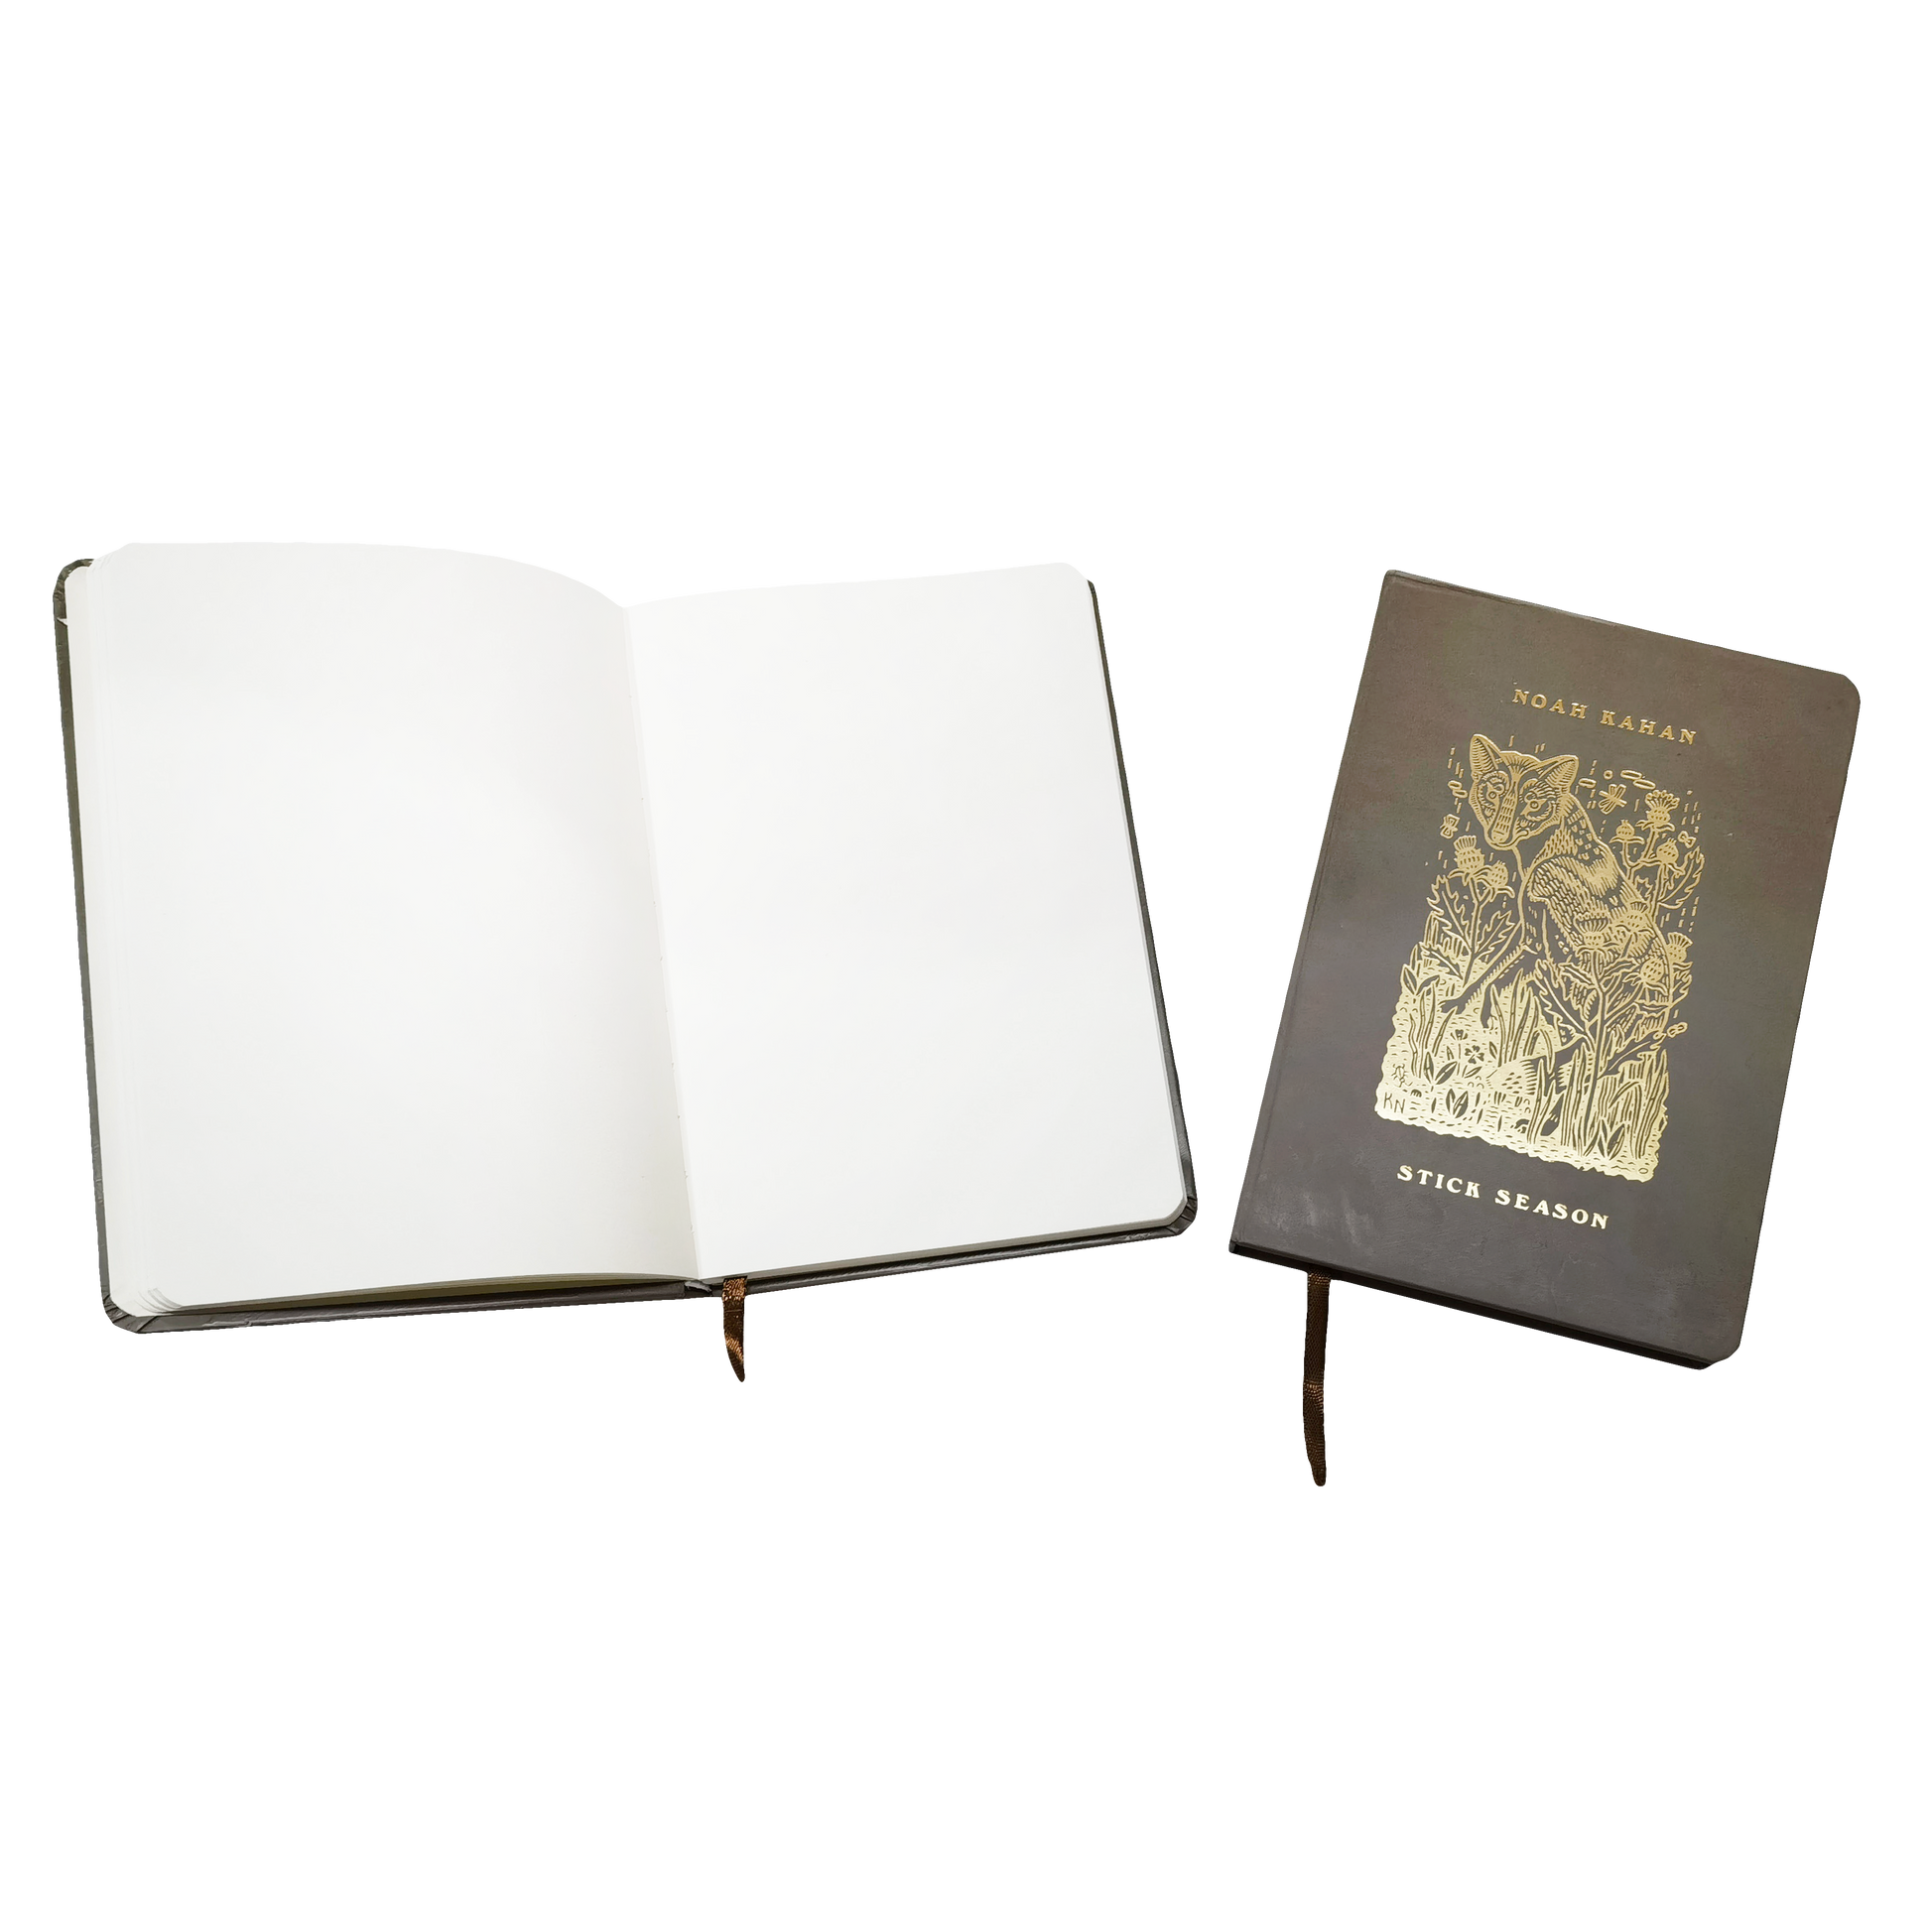 Brown Noah Kahan journal with Stick Season gold foil artwork on front and black white internal pages.